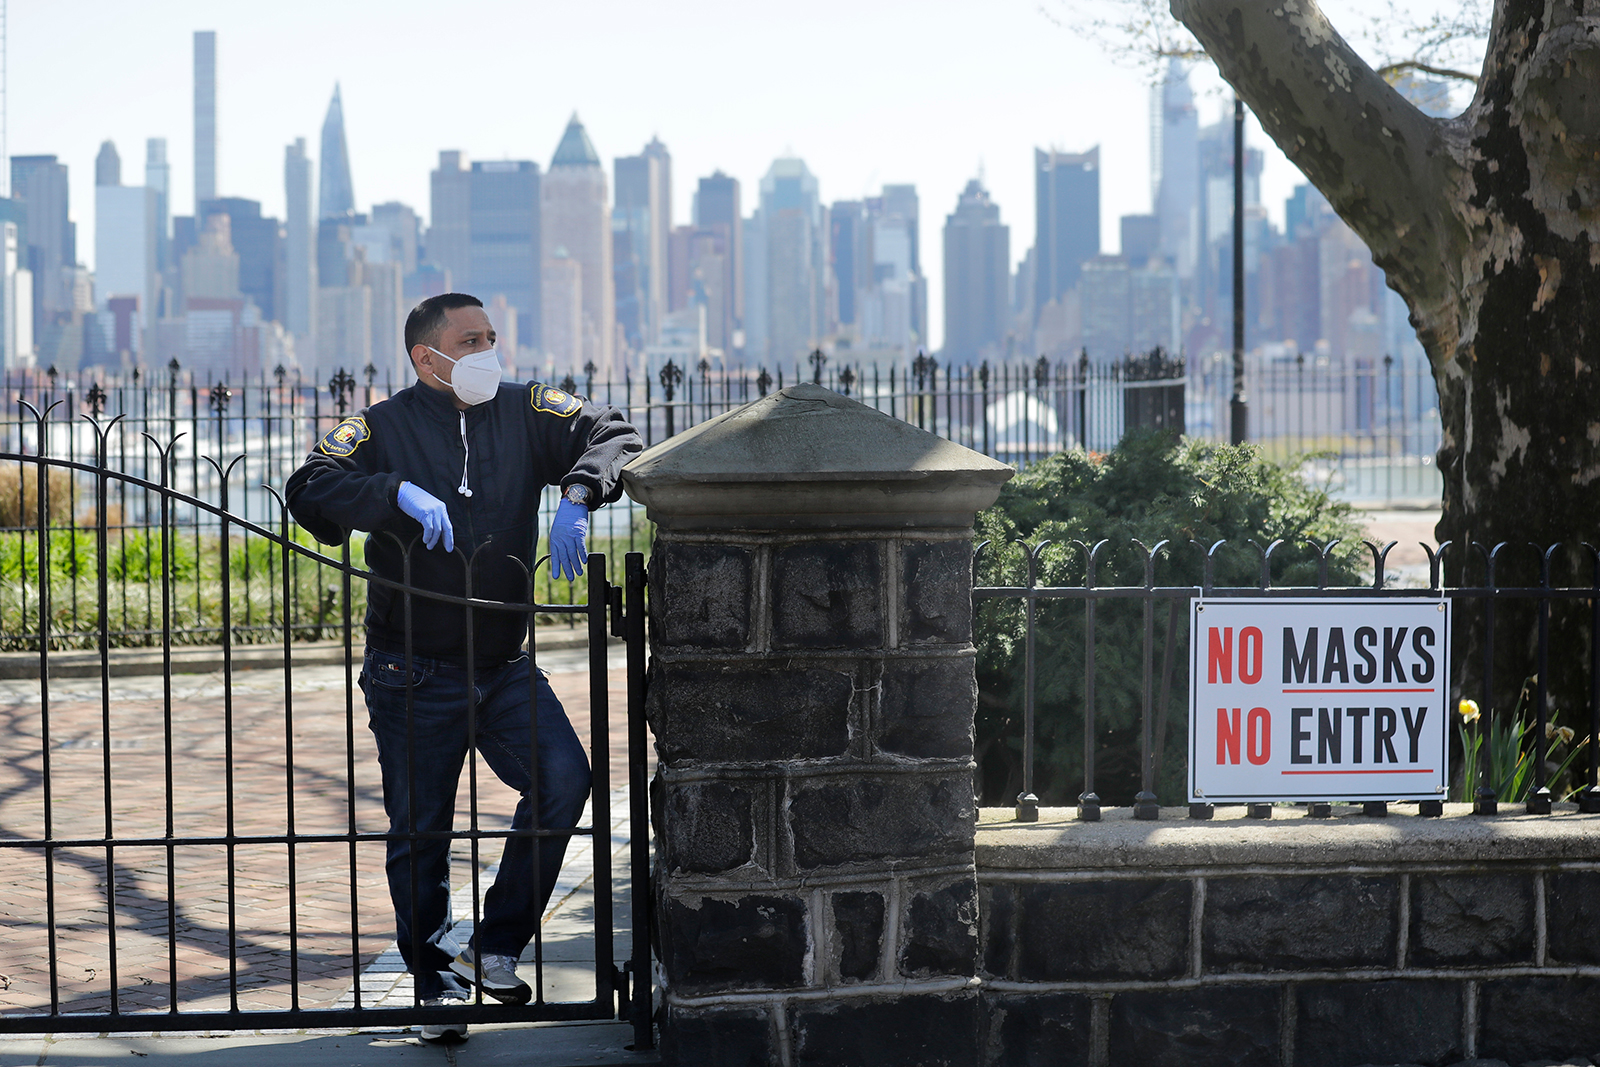 A public safety officer stands behind the gates of temporarily closed park at a crowded viewing point for a flyover by the Navy’s Blue Angels and the Air Force’s Thunderbirds of the New York City skyline in Weehawken, New Jersey, on April 28.